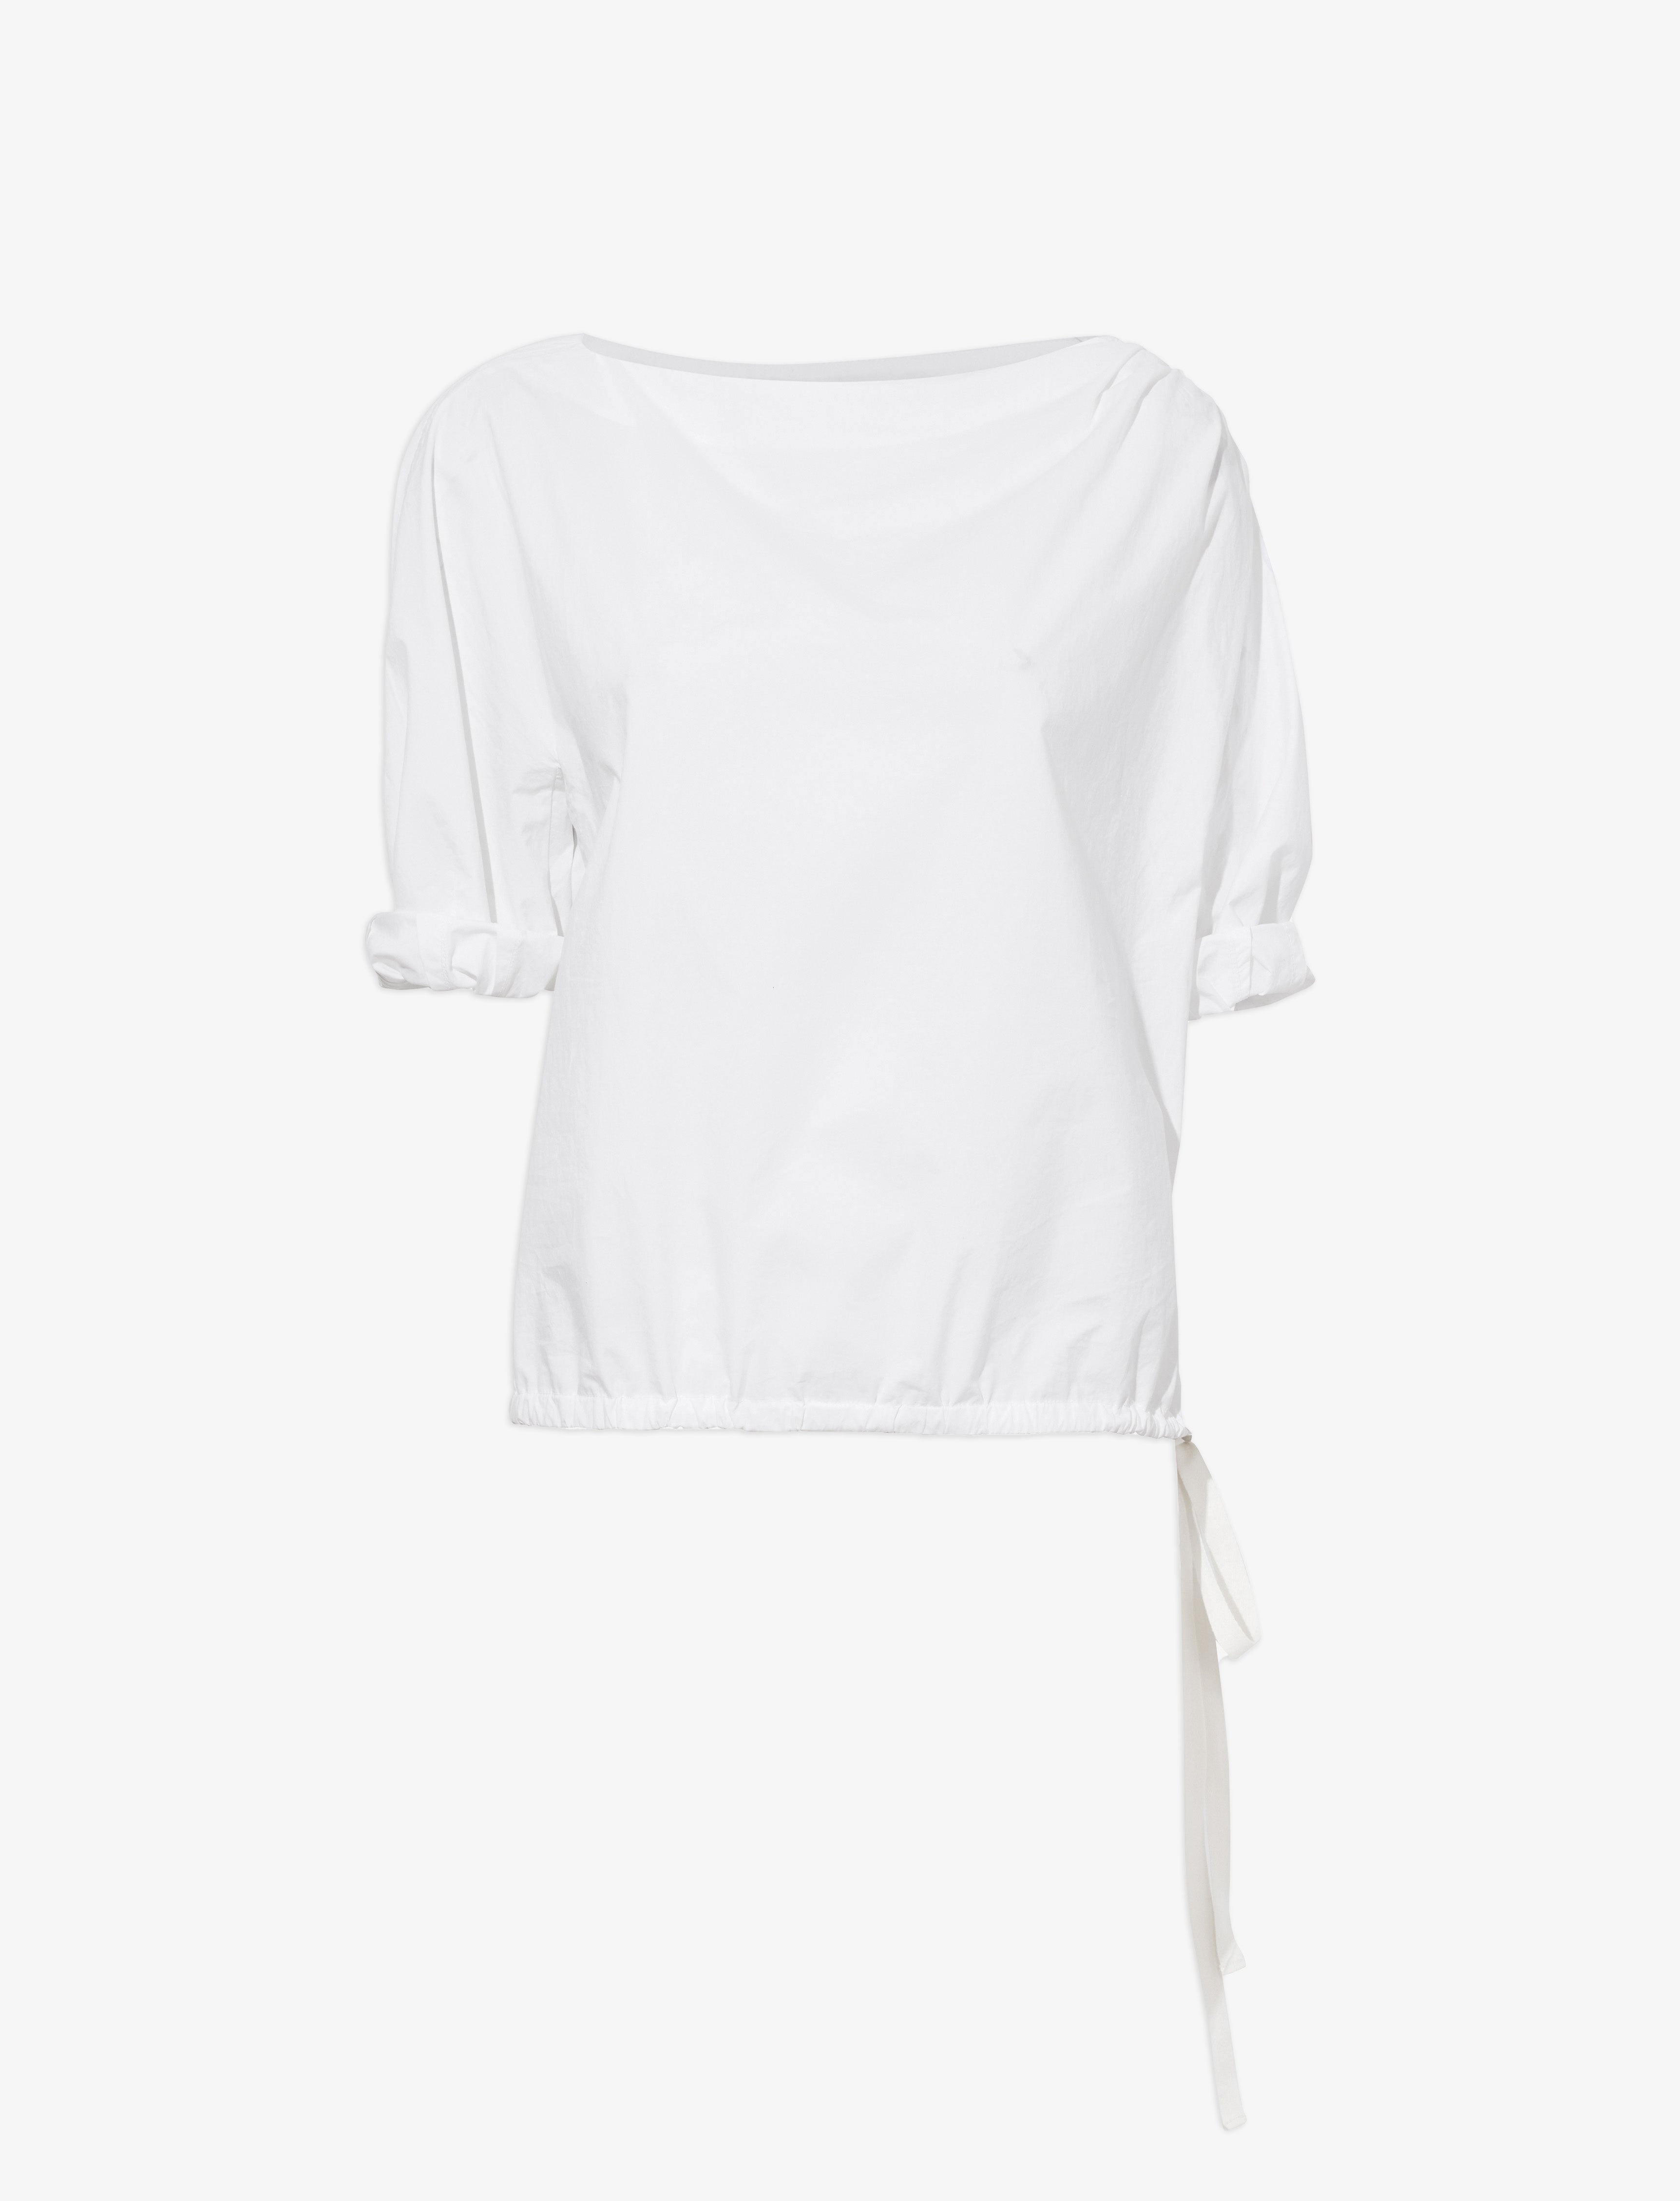 Addison Puff Sleeve Top in Washed Cotton Poplin - 1